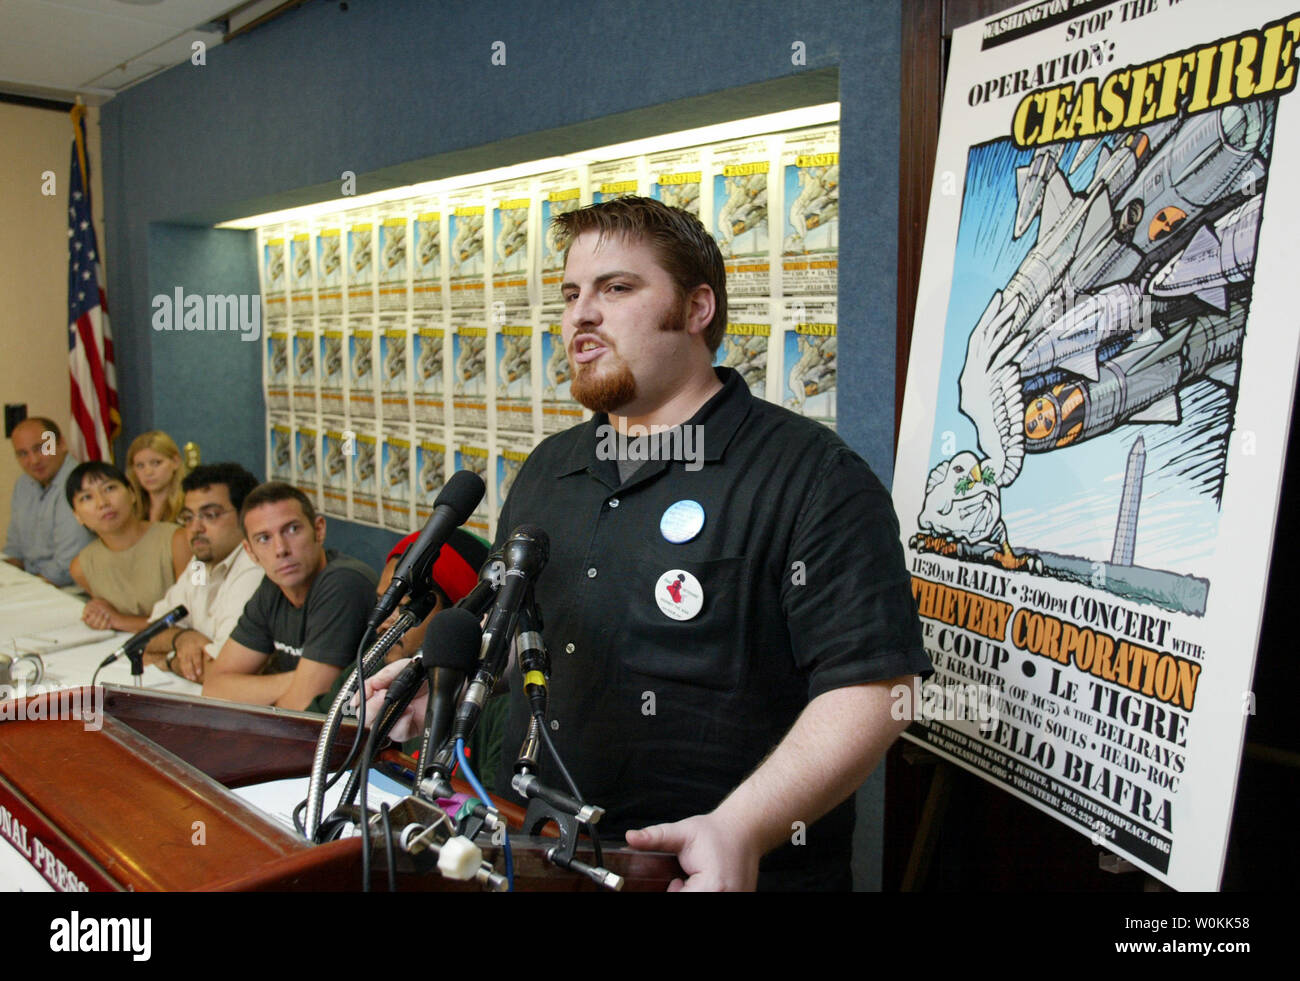 Iraq Veterans Against the War activist Michael Hoffman speaks at a joint news conference at the National Press building in Washington, August 10, 2005. United for Peace and Justice holds a news conference to announce a concert, 'Operation Ceasefire,' to help raise awareness of the situation facing American soldiers in Iraq. (UPI Photo/Yuri Gripas) Stock Photo